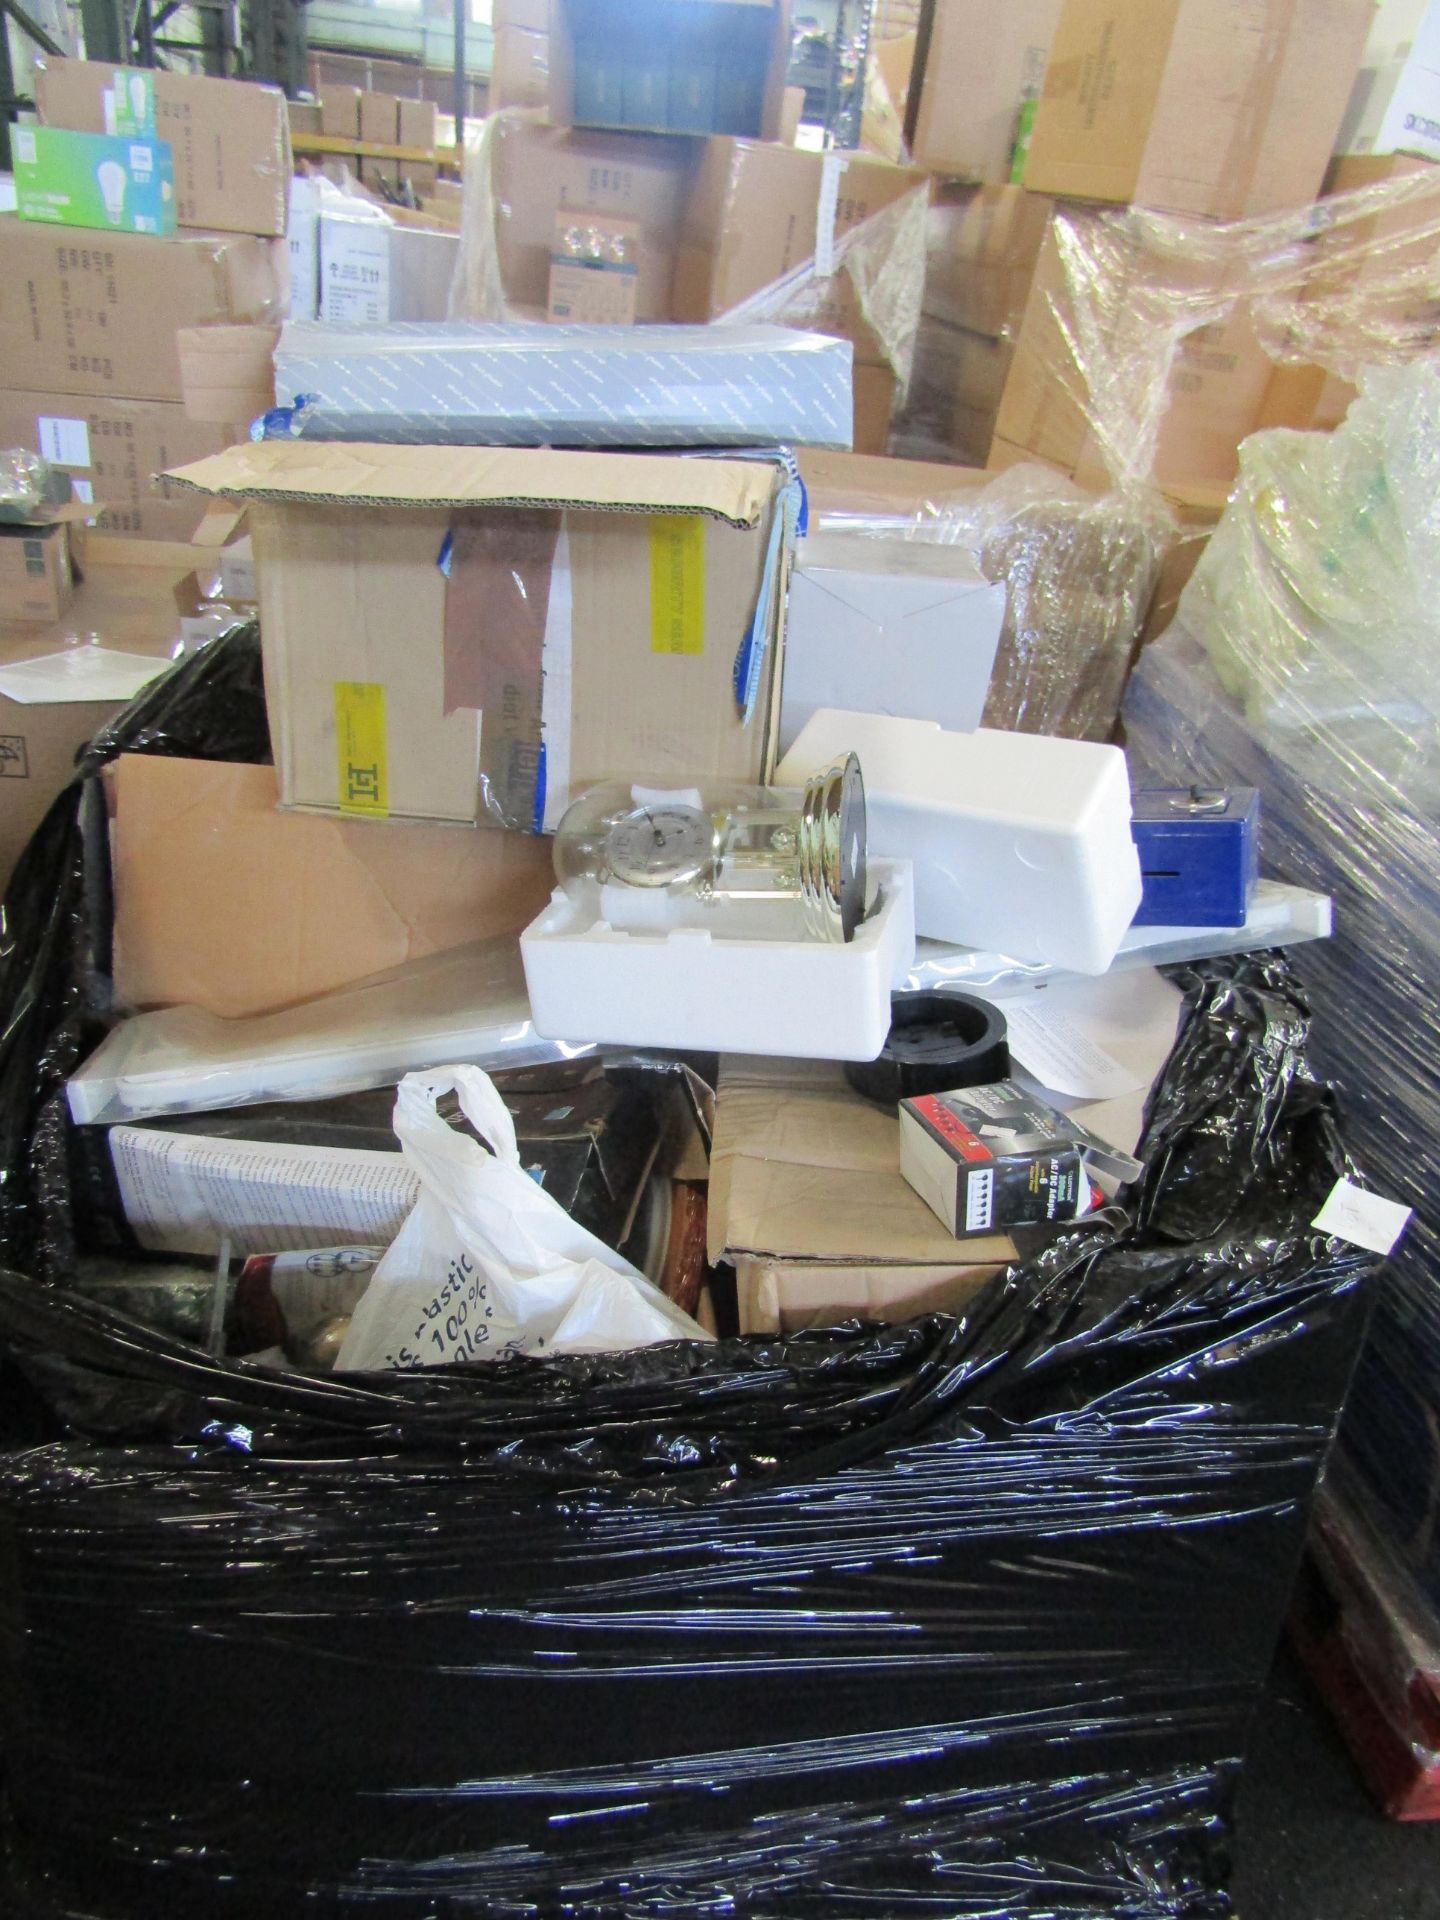 Pallet of unmanifested warehouse clearance and customer returns, can contain unwanted, refused